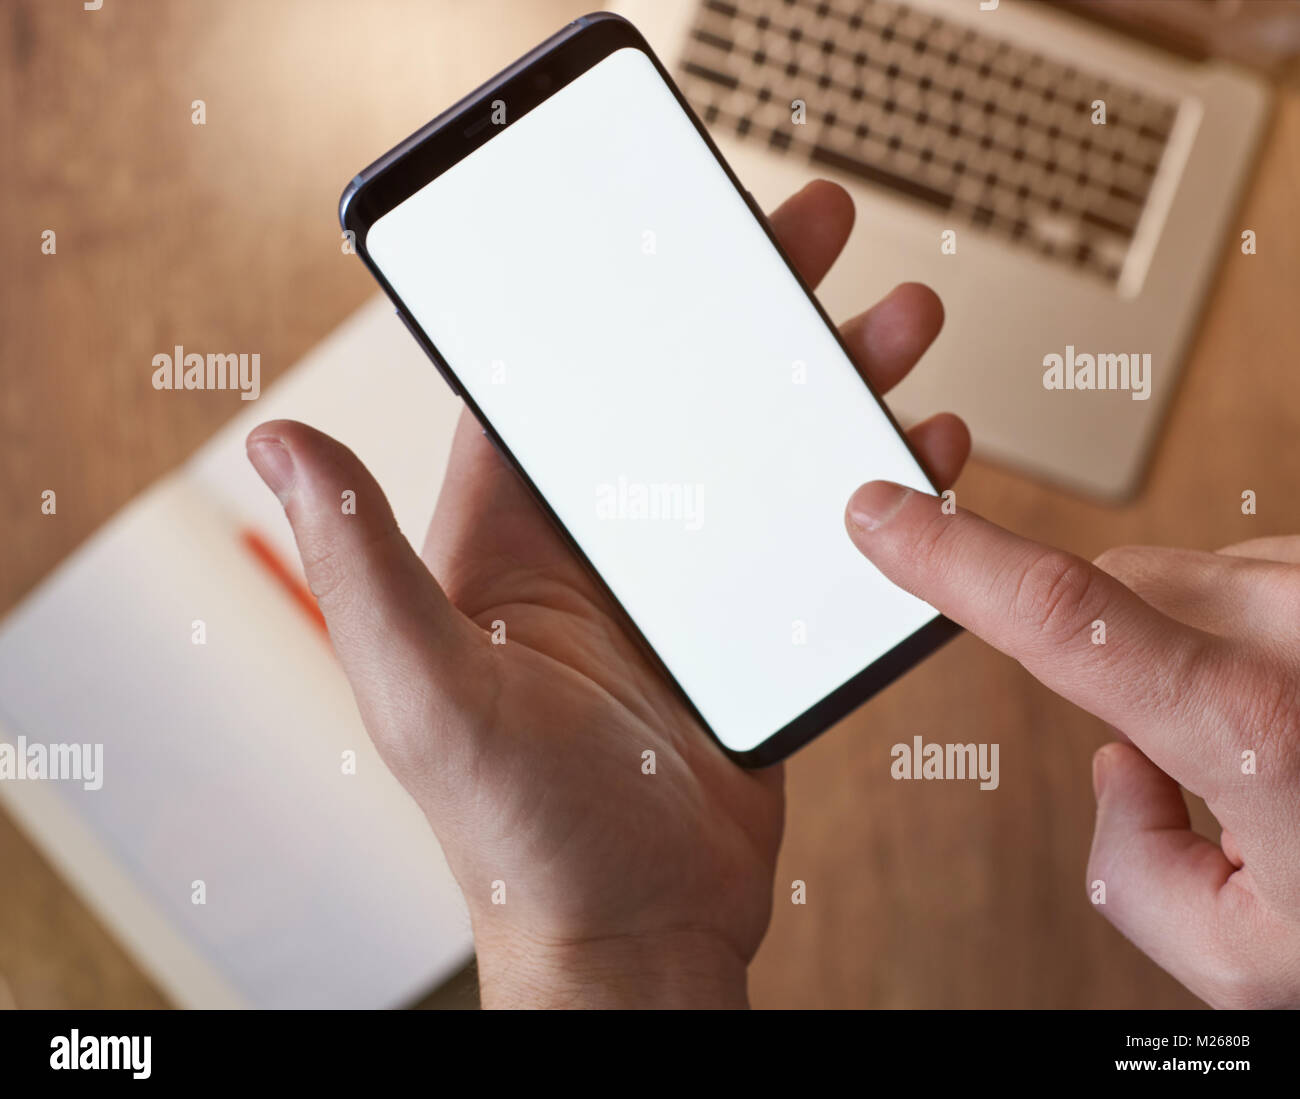 Online learning Thema. Moderne Smartphone in der Hand palm Mock-up-close-up Stockfoto